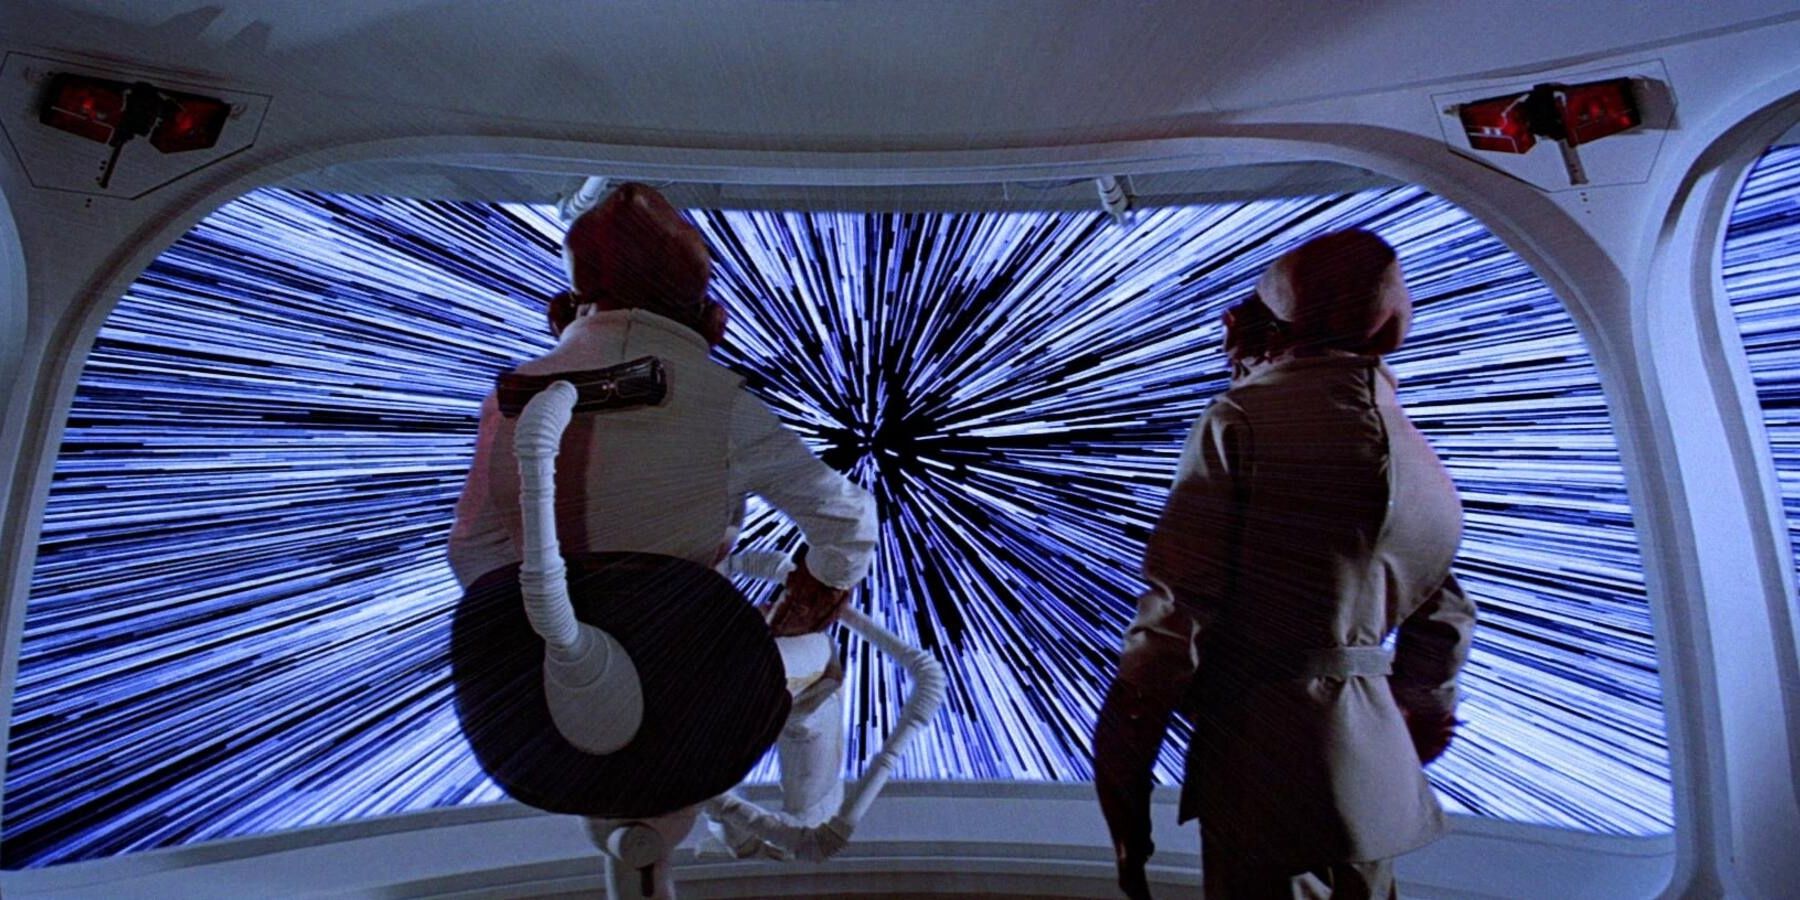 Admiral Ackbar makes the jump to hyperspace